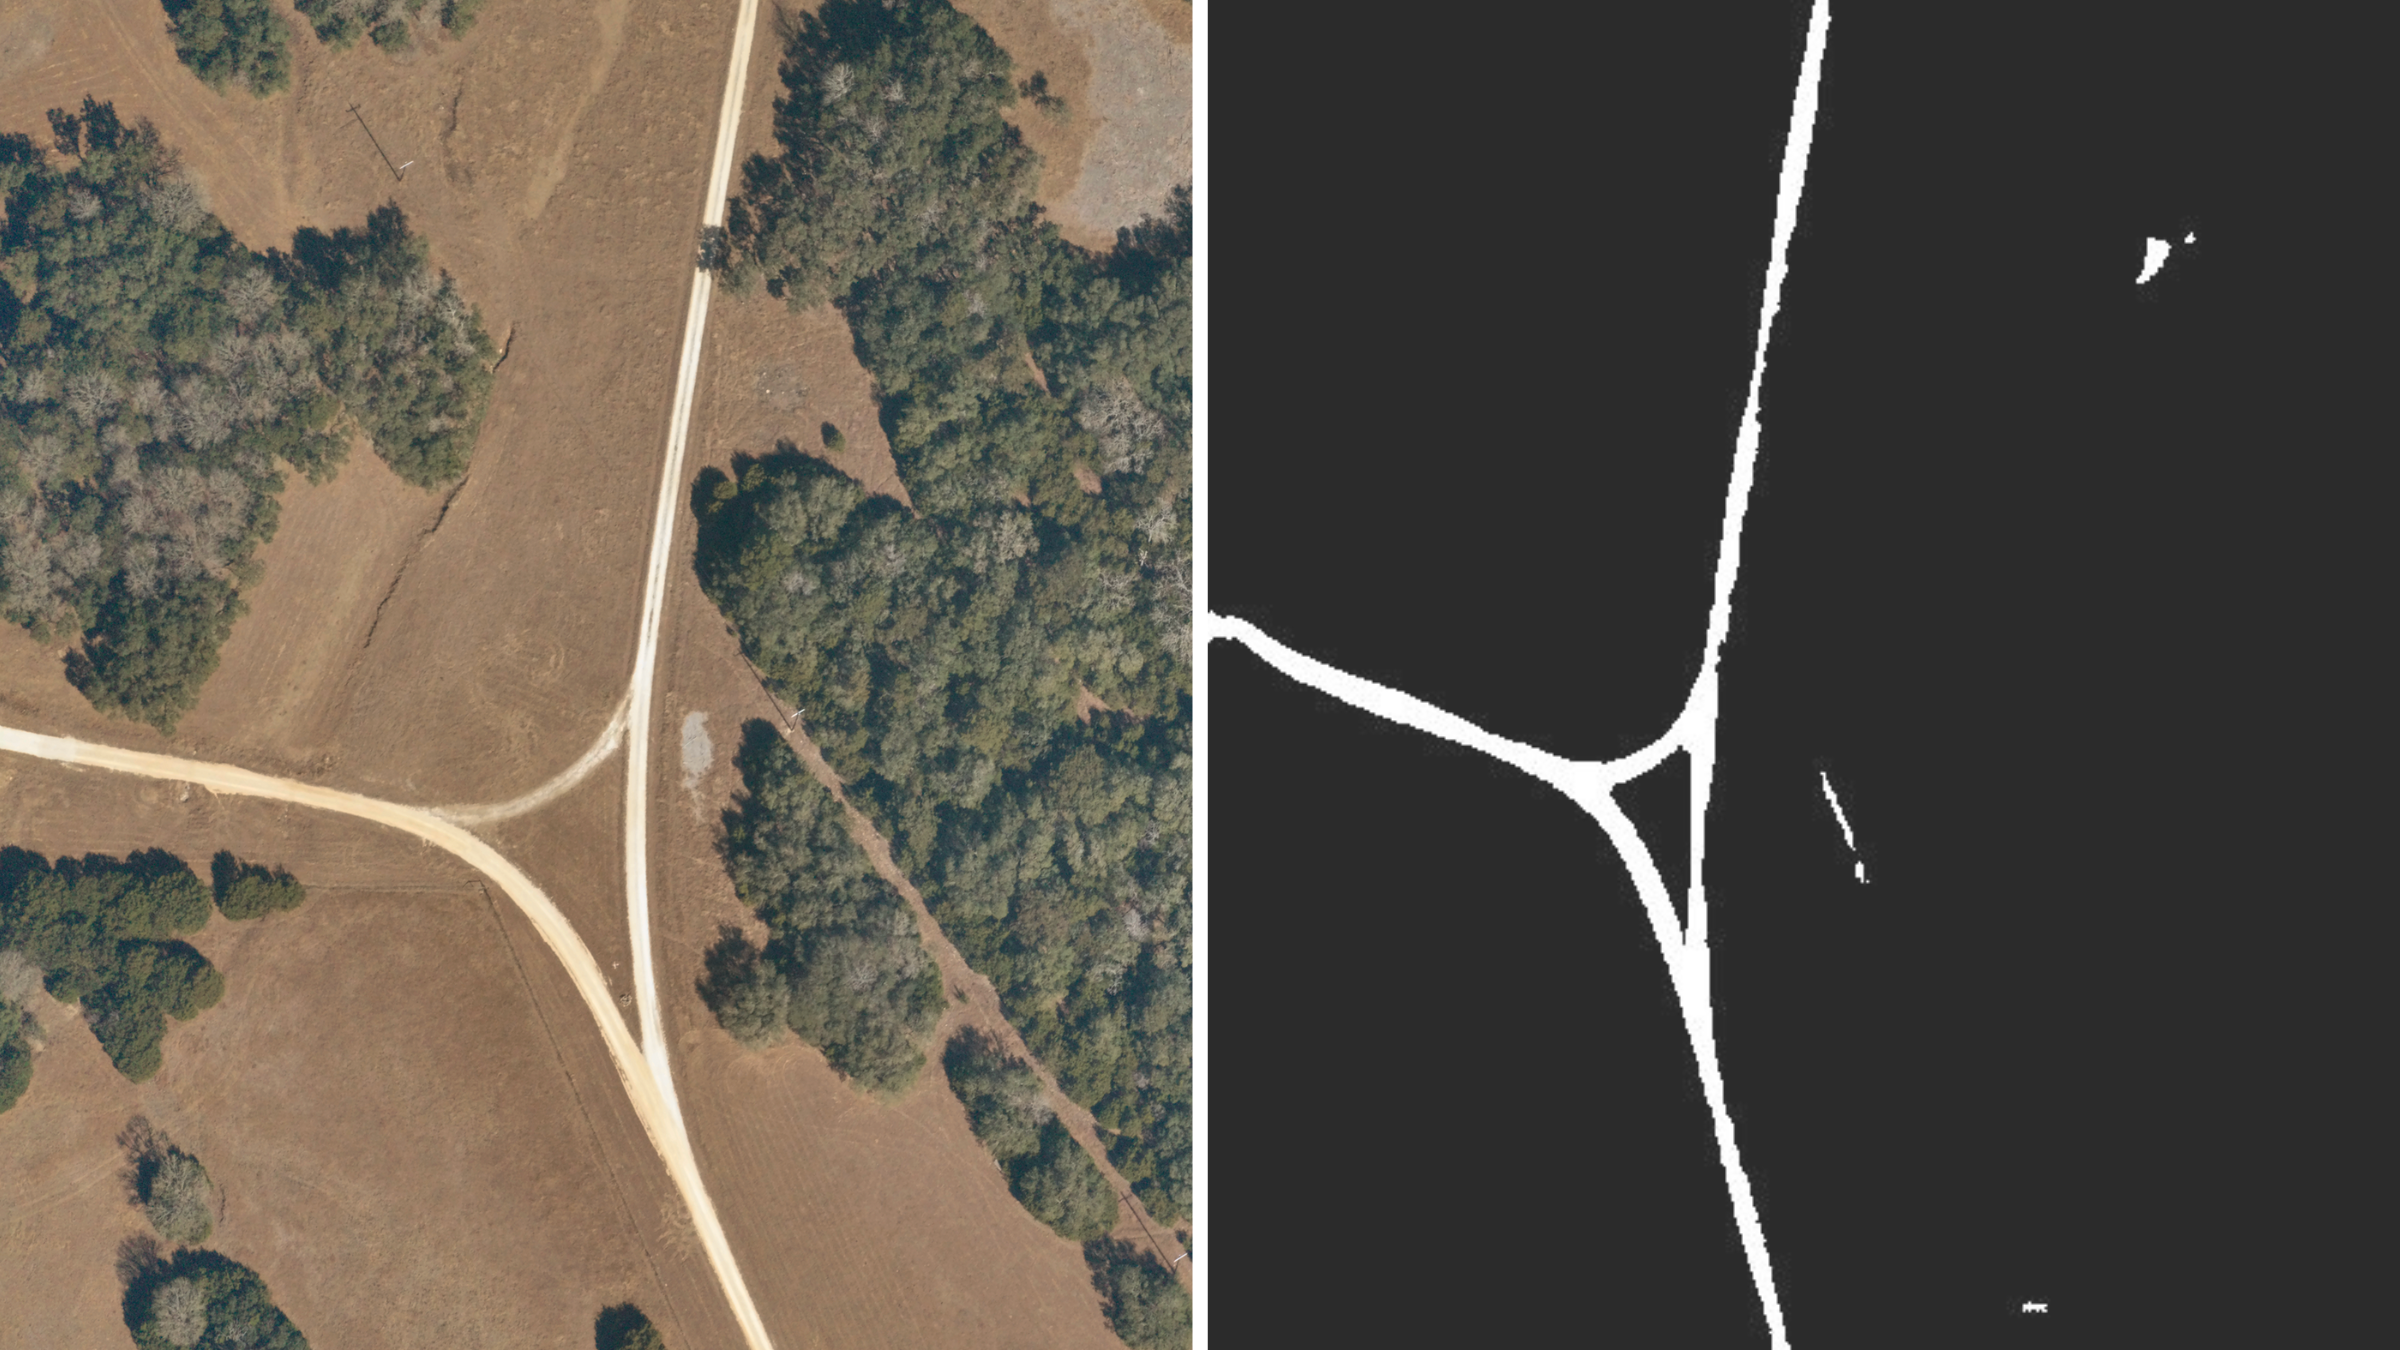 Near Space Labs 10 cm imagery on left next to respected binary road mask on left, created by Maria Alba from “A Novel Approach for Road Detection on Aerial Imagery.”